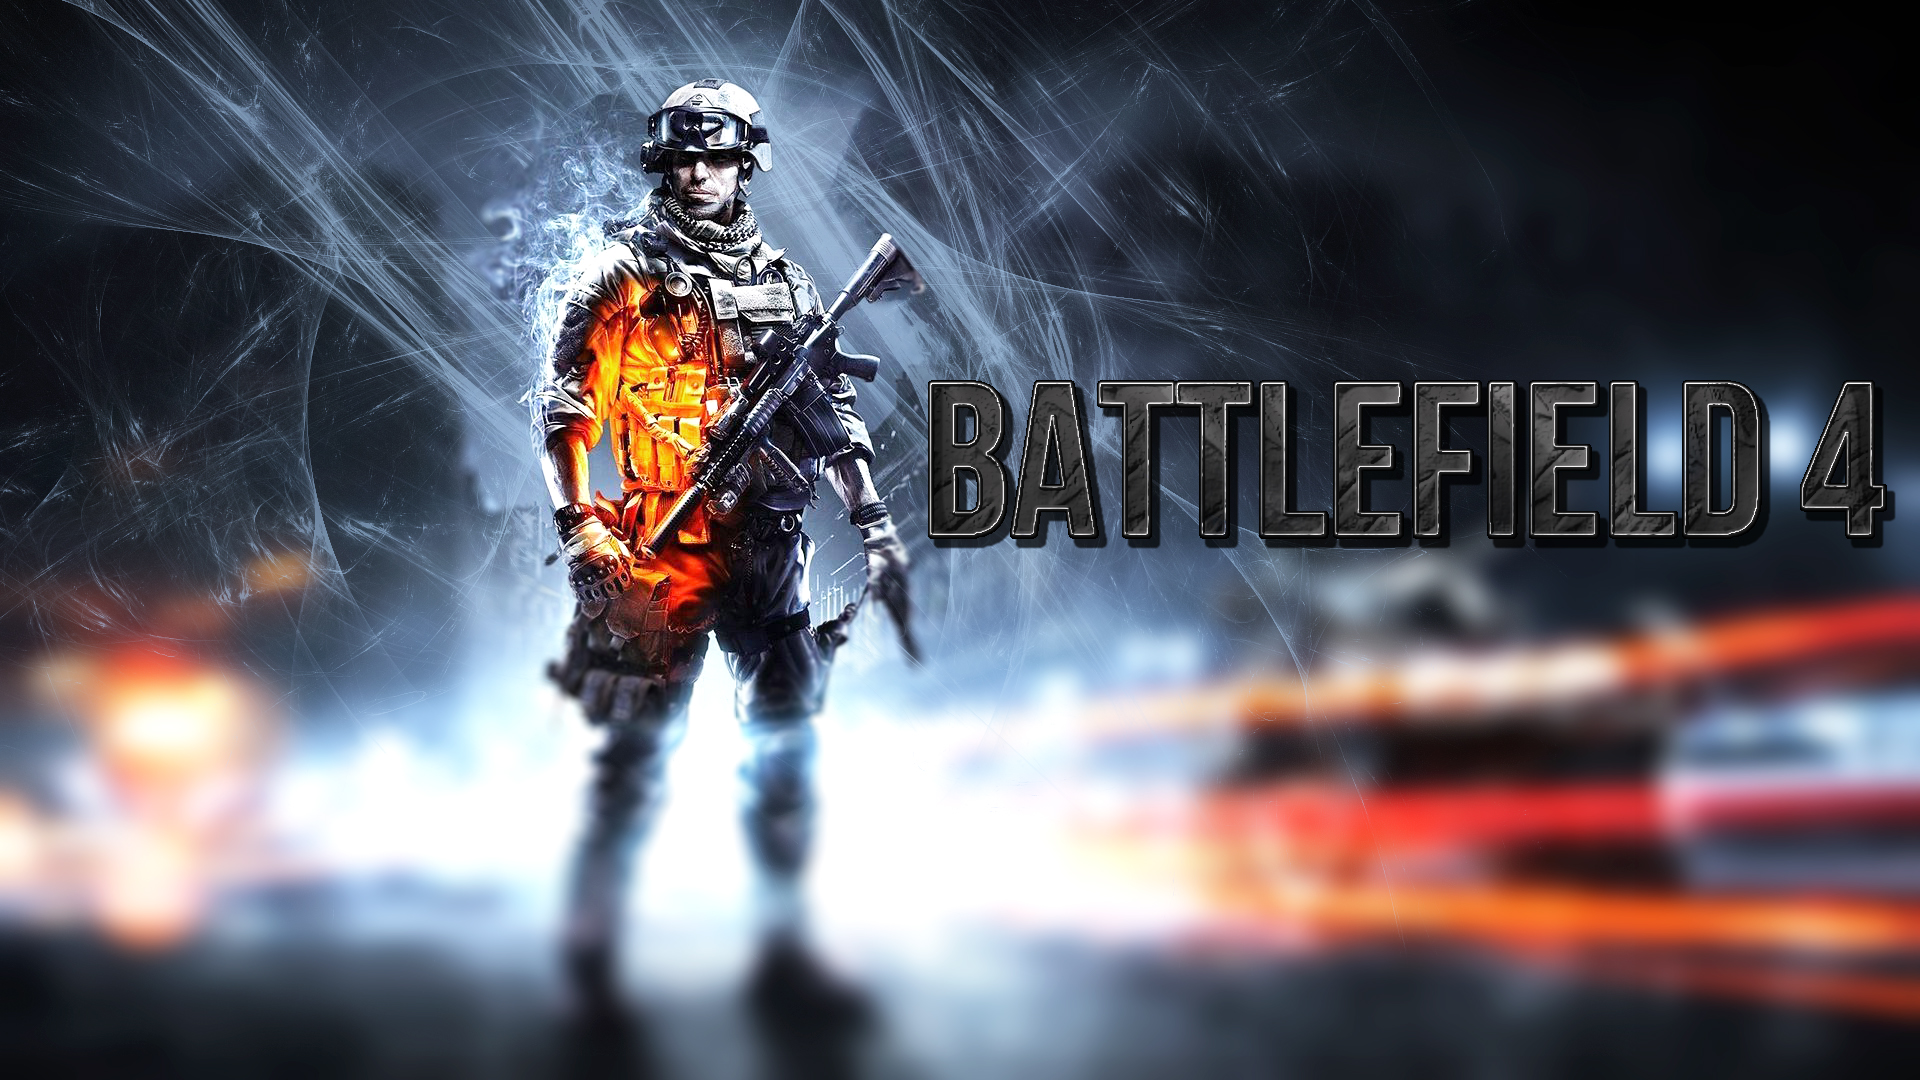 BF4] Large Graphic   TAW   The Art of Warfare   Premier Online Gaming 1920x1080